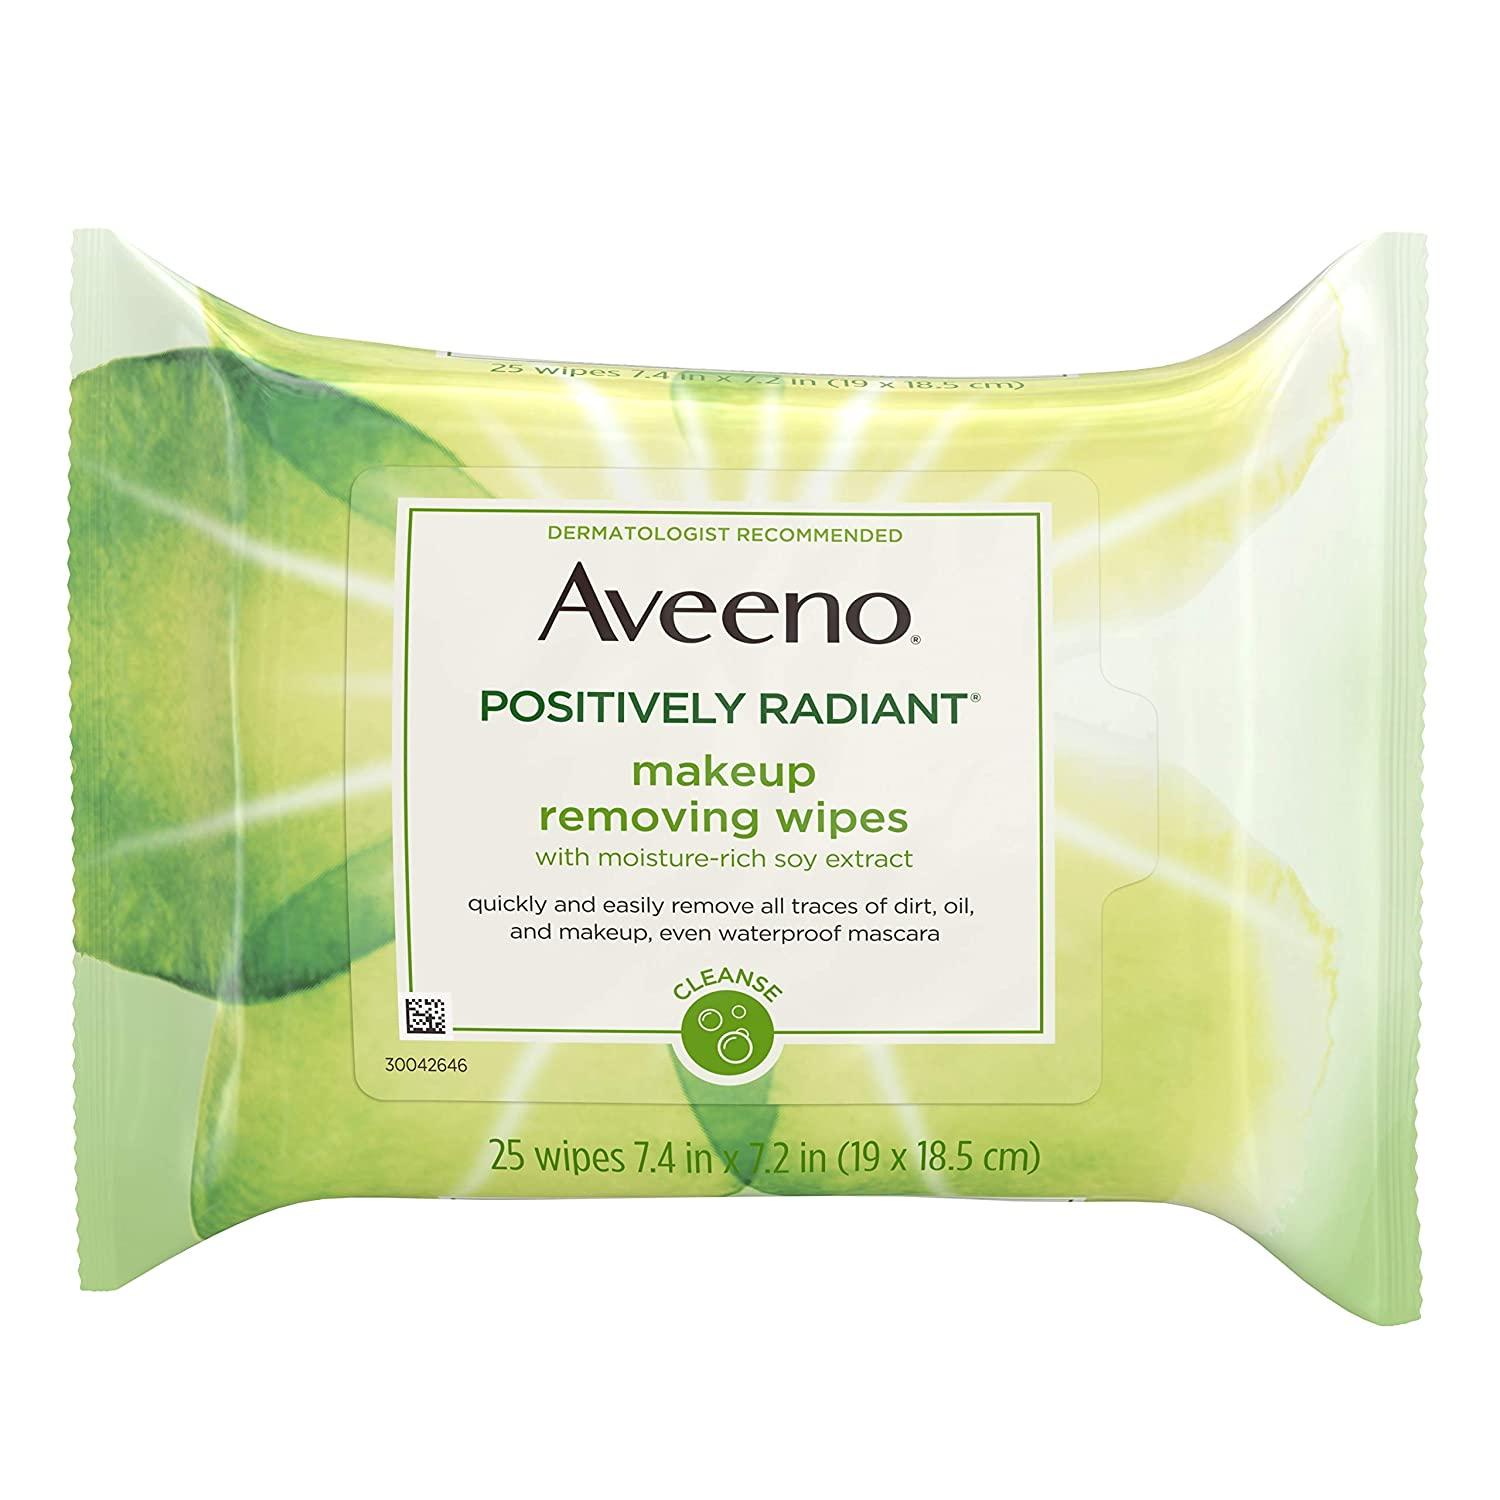 Positively Radiant Makeup Removing Wipes